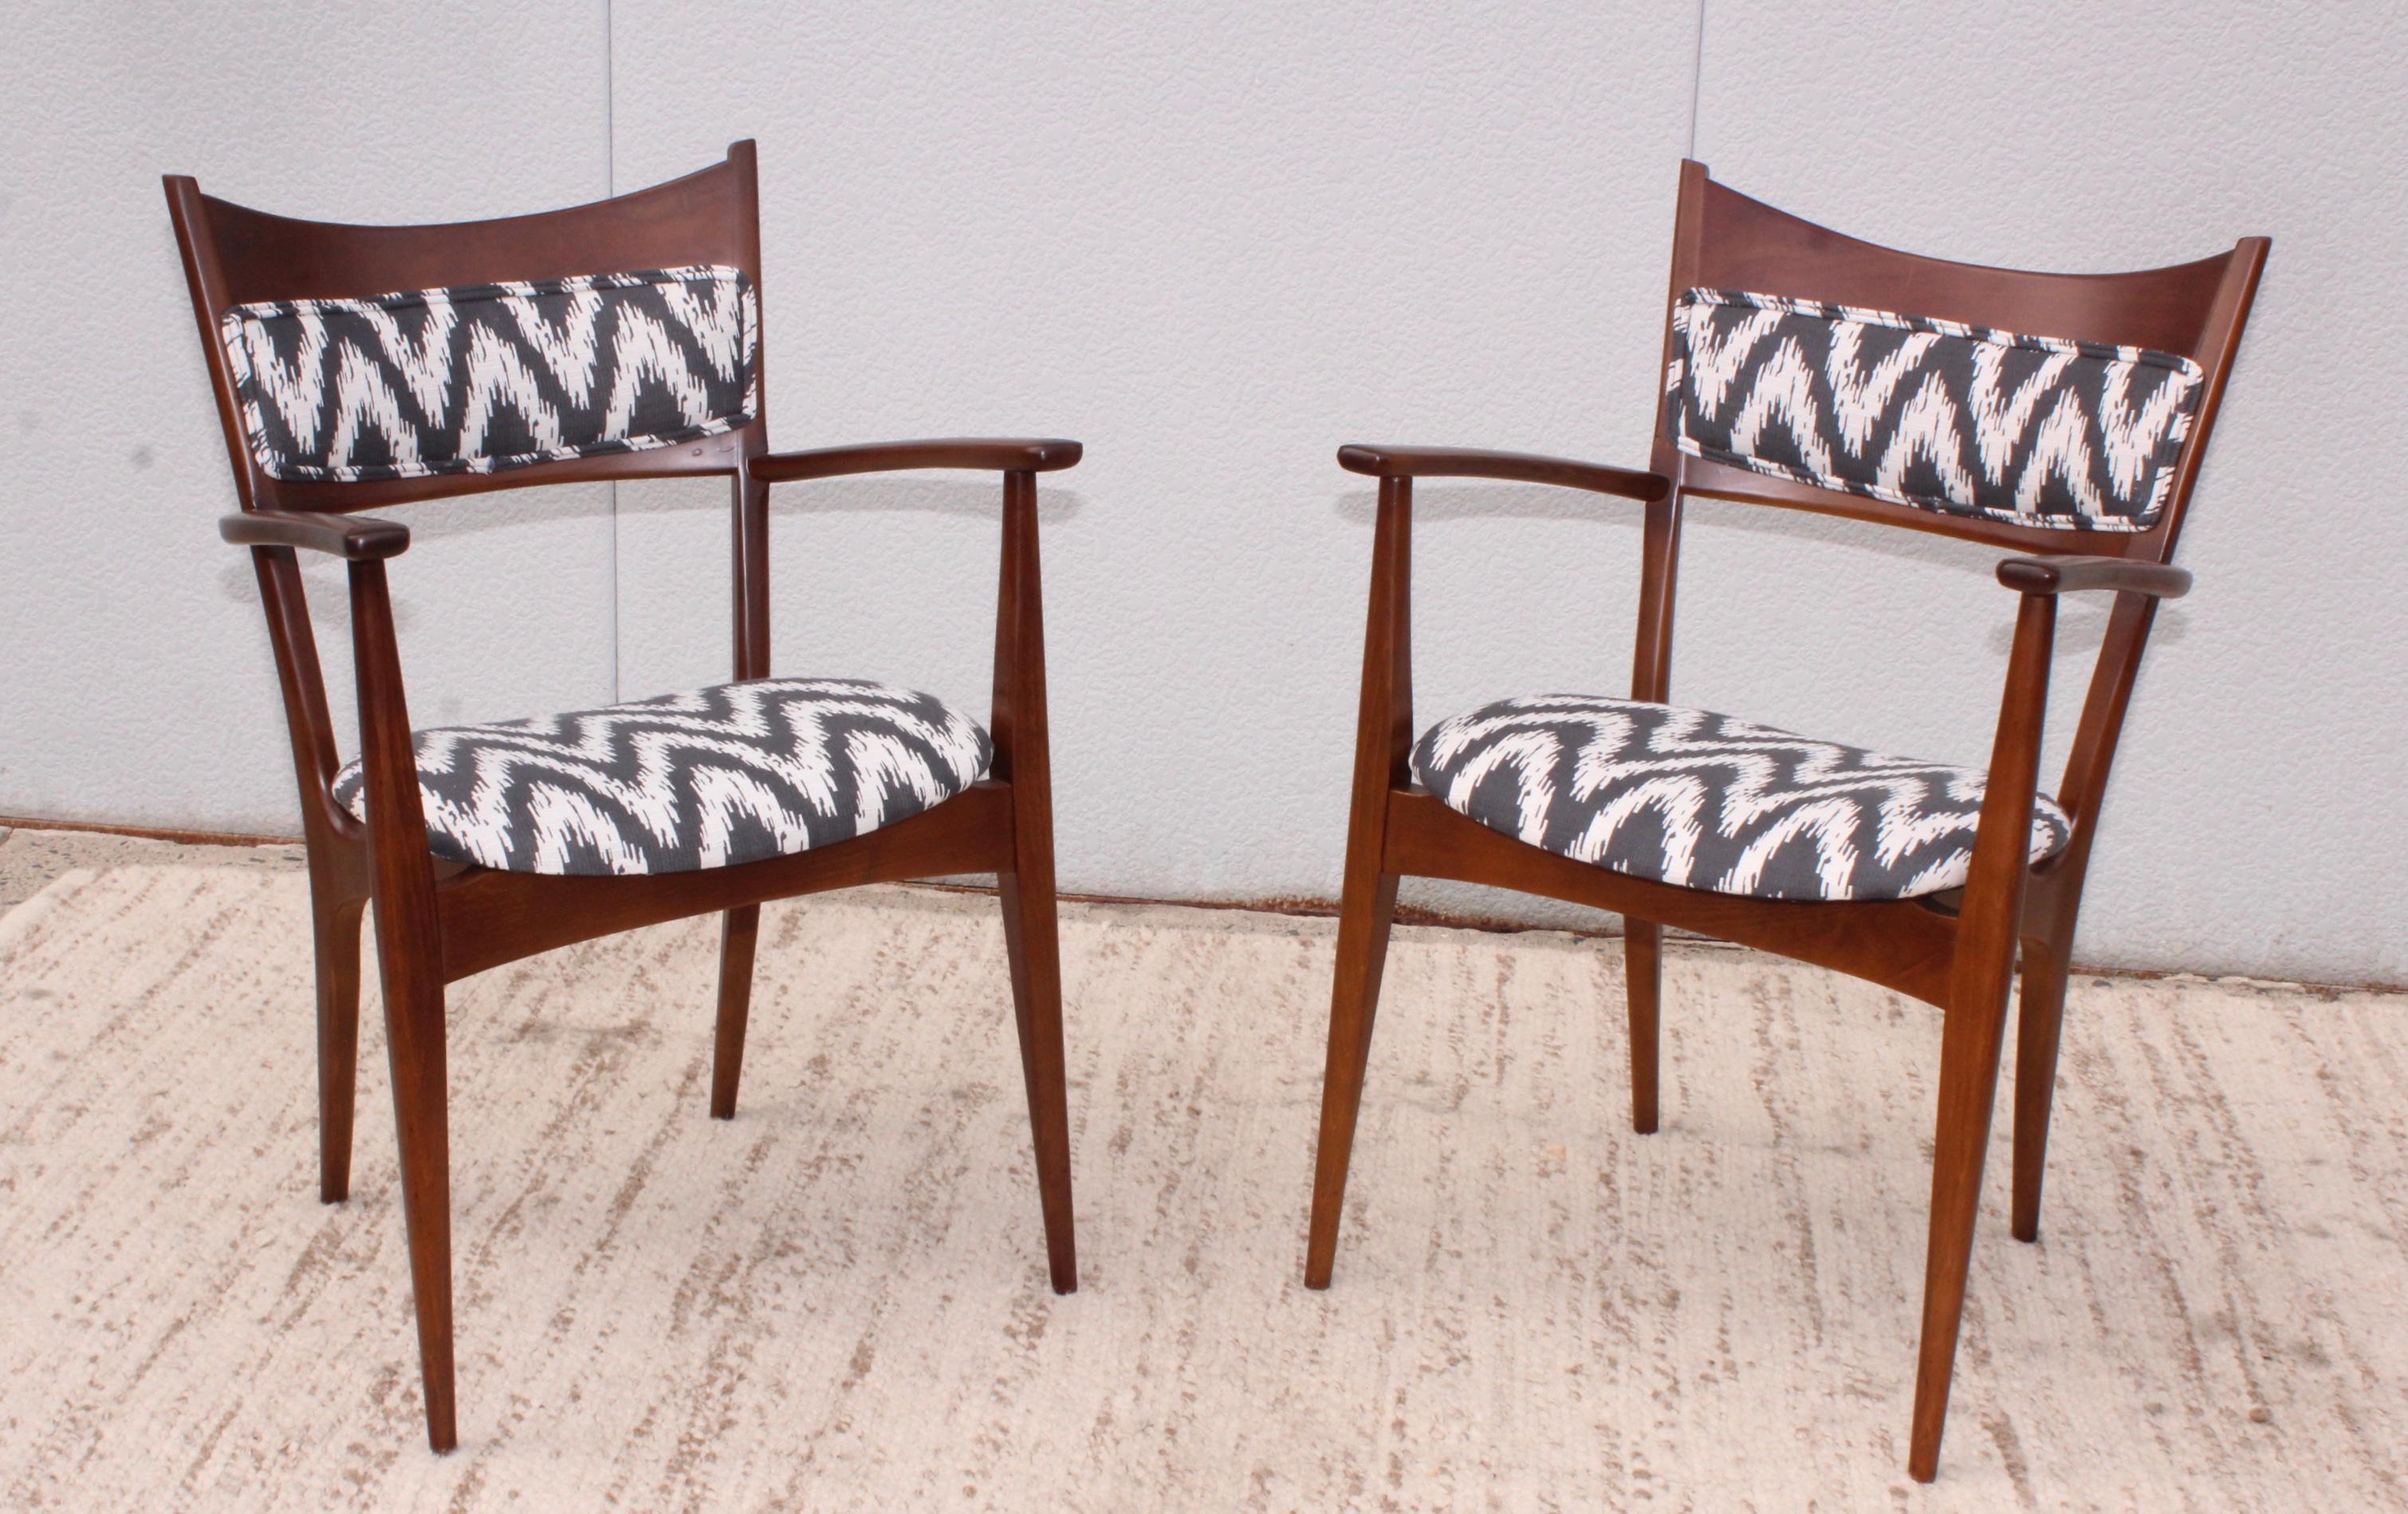 Mid-20th Century Mid-Century Modern Sculptural Dining Chairs